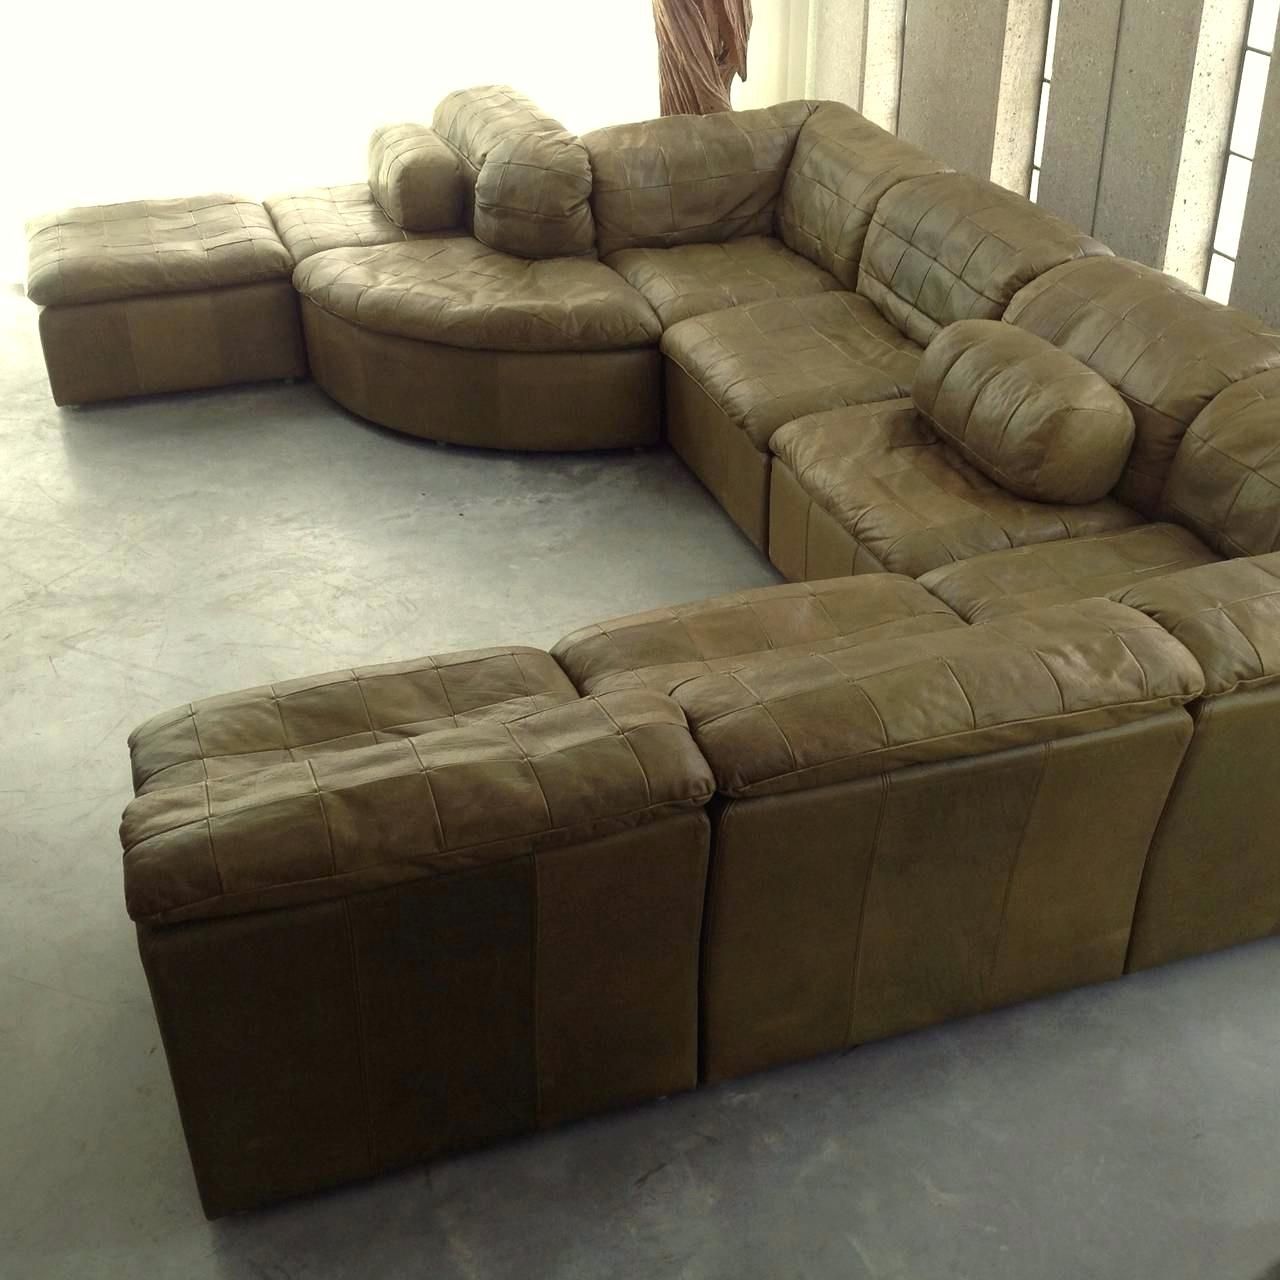 Green Sectional Sas Couches For Sale Sofas Bay Wi Teal Leather Regarding Green Bay Wi Sectional Sofas (Photo 6 of 10)